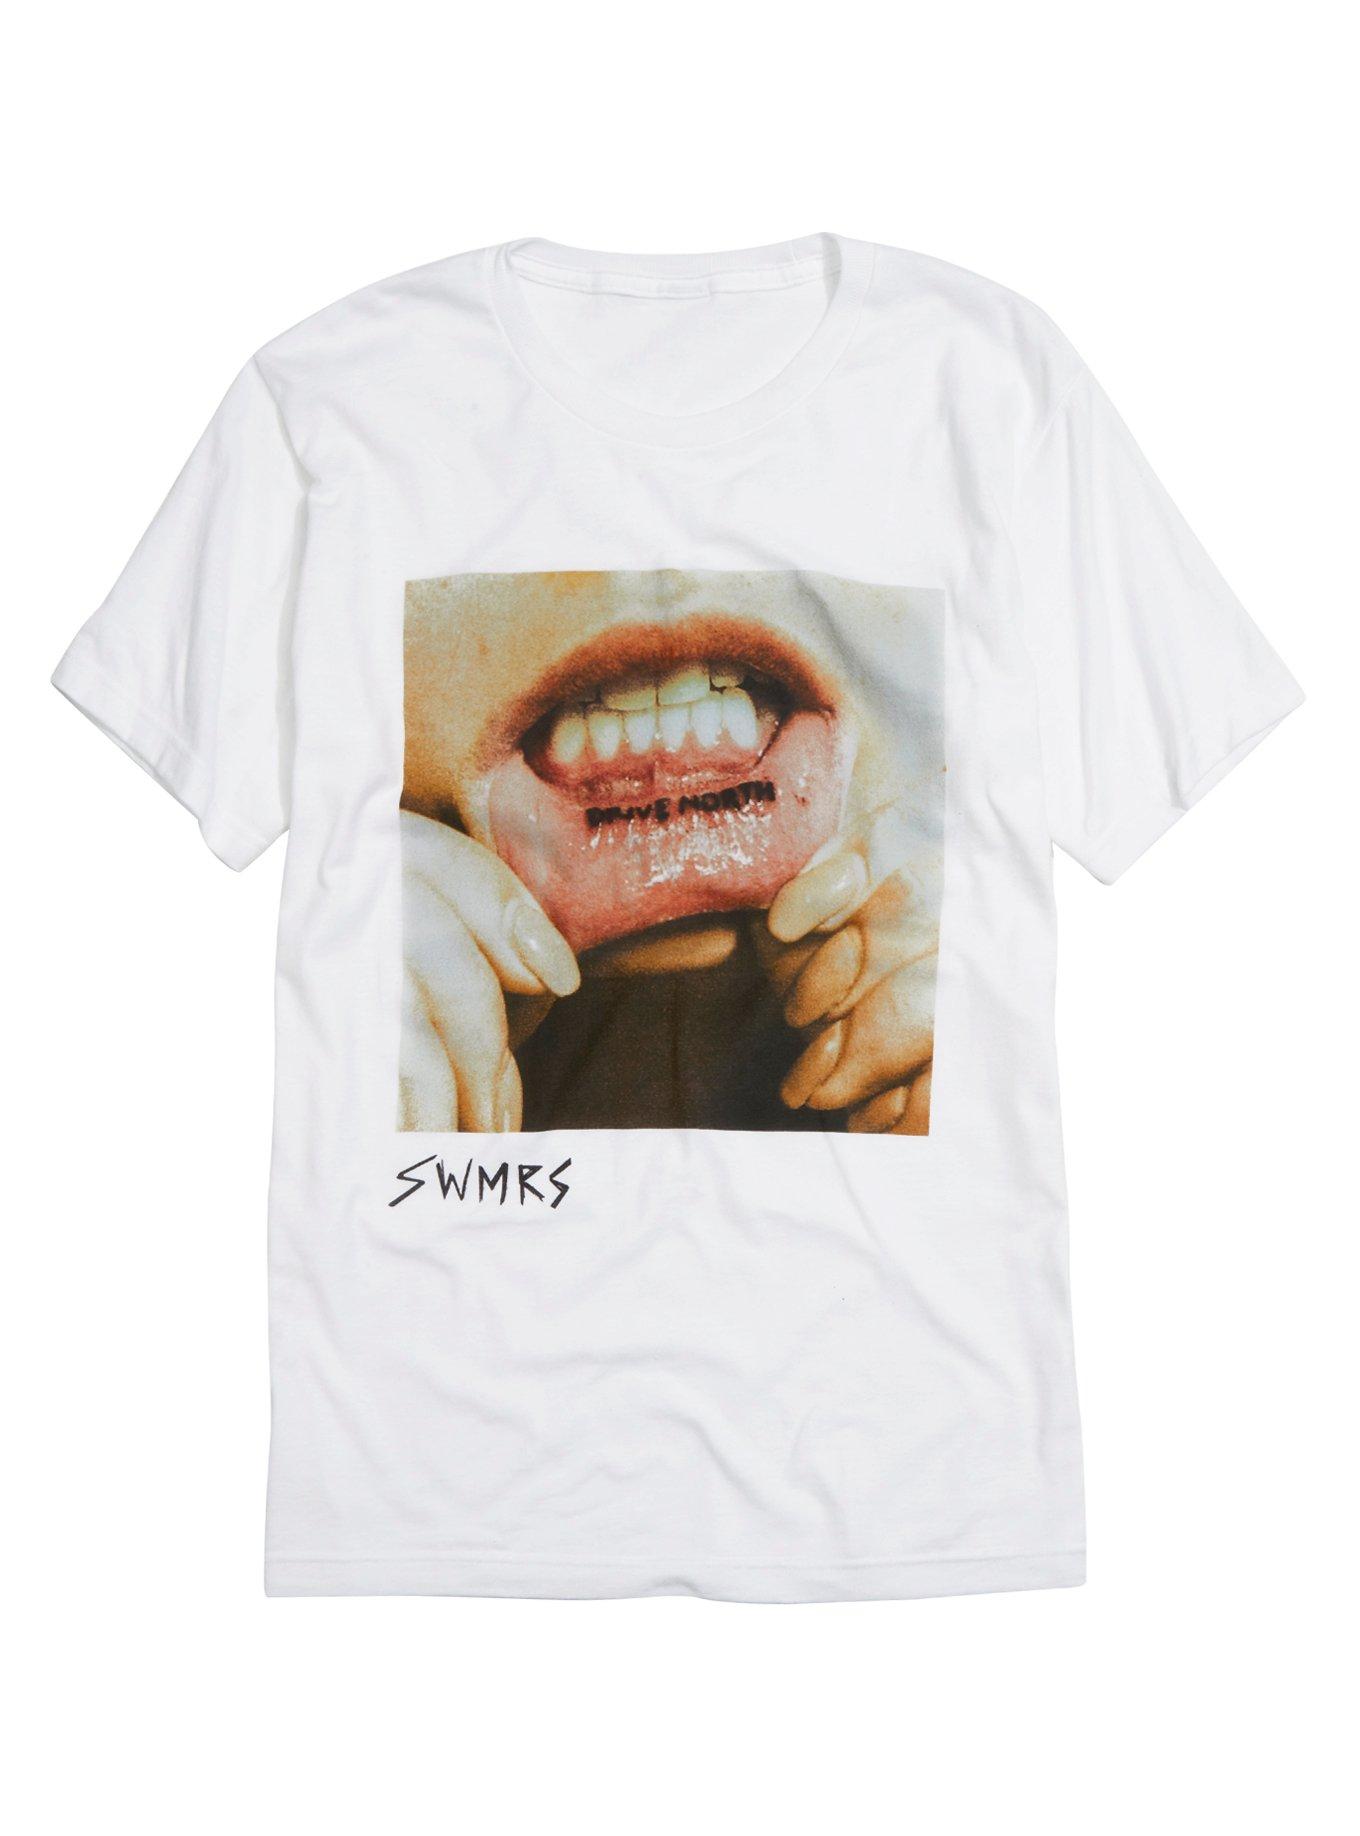 Swmrs Drive North Cover T-Shirt | Hot Topic